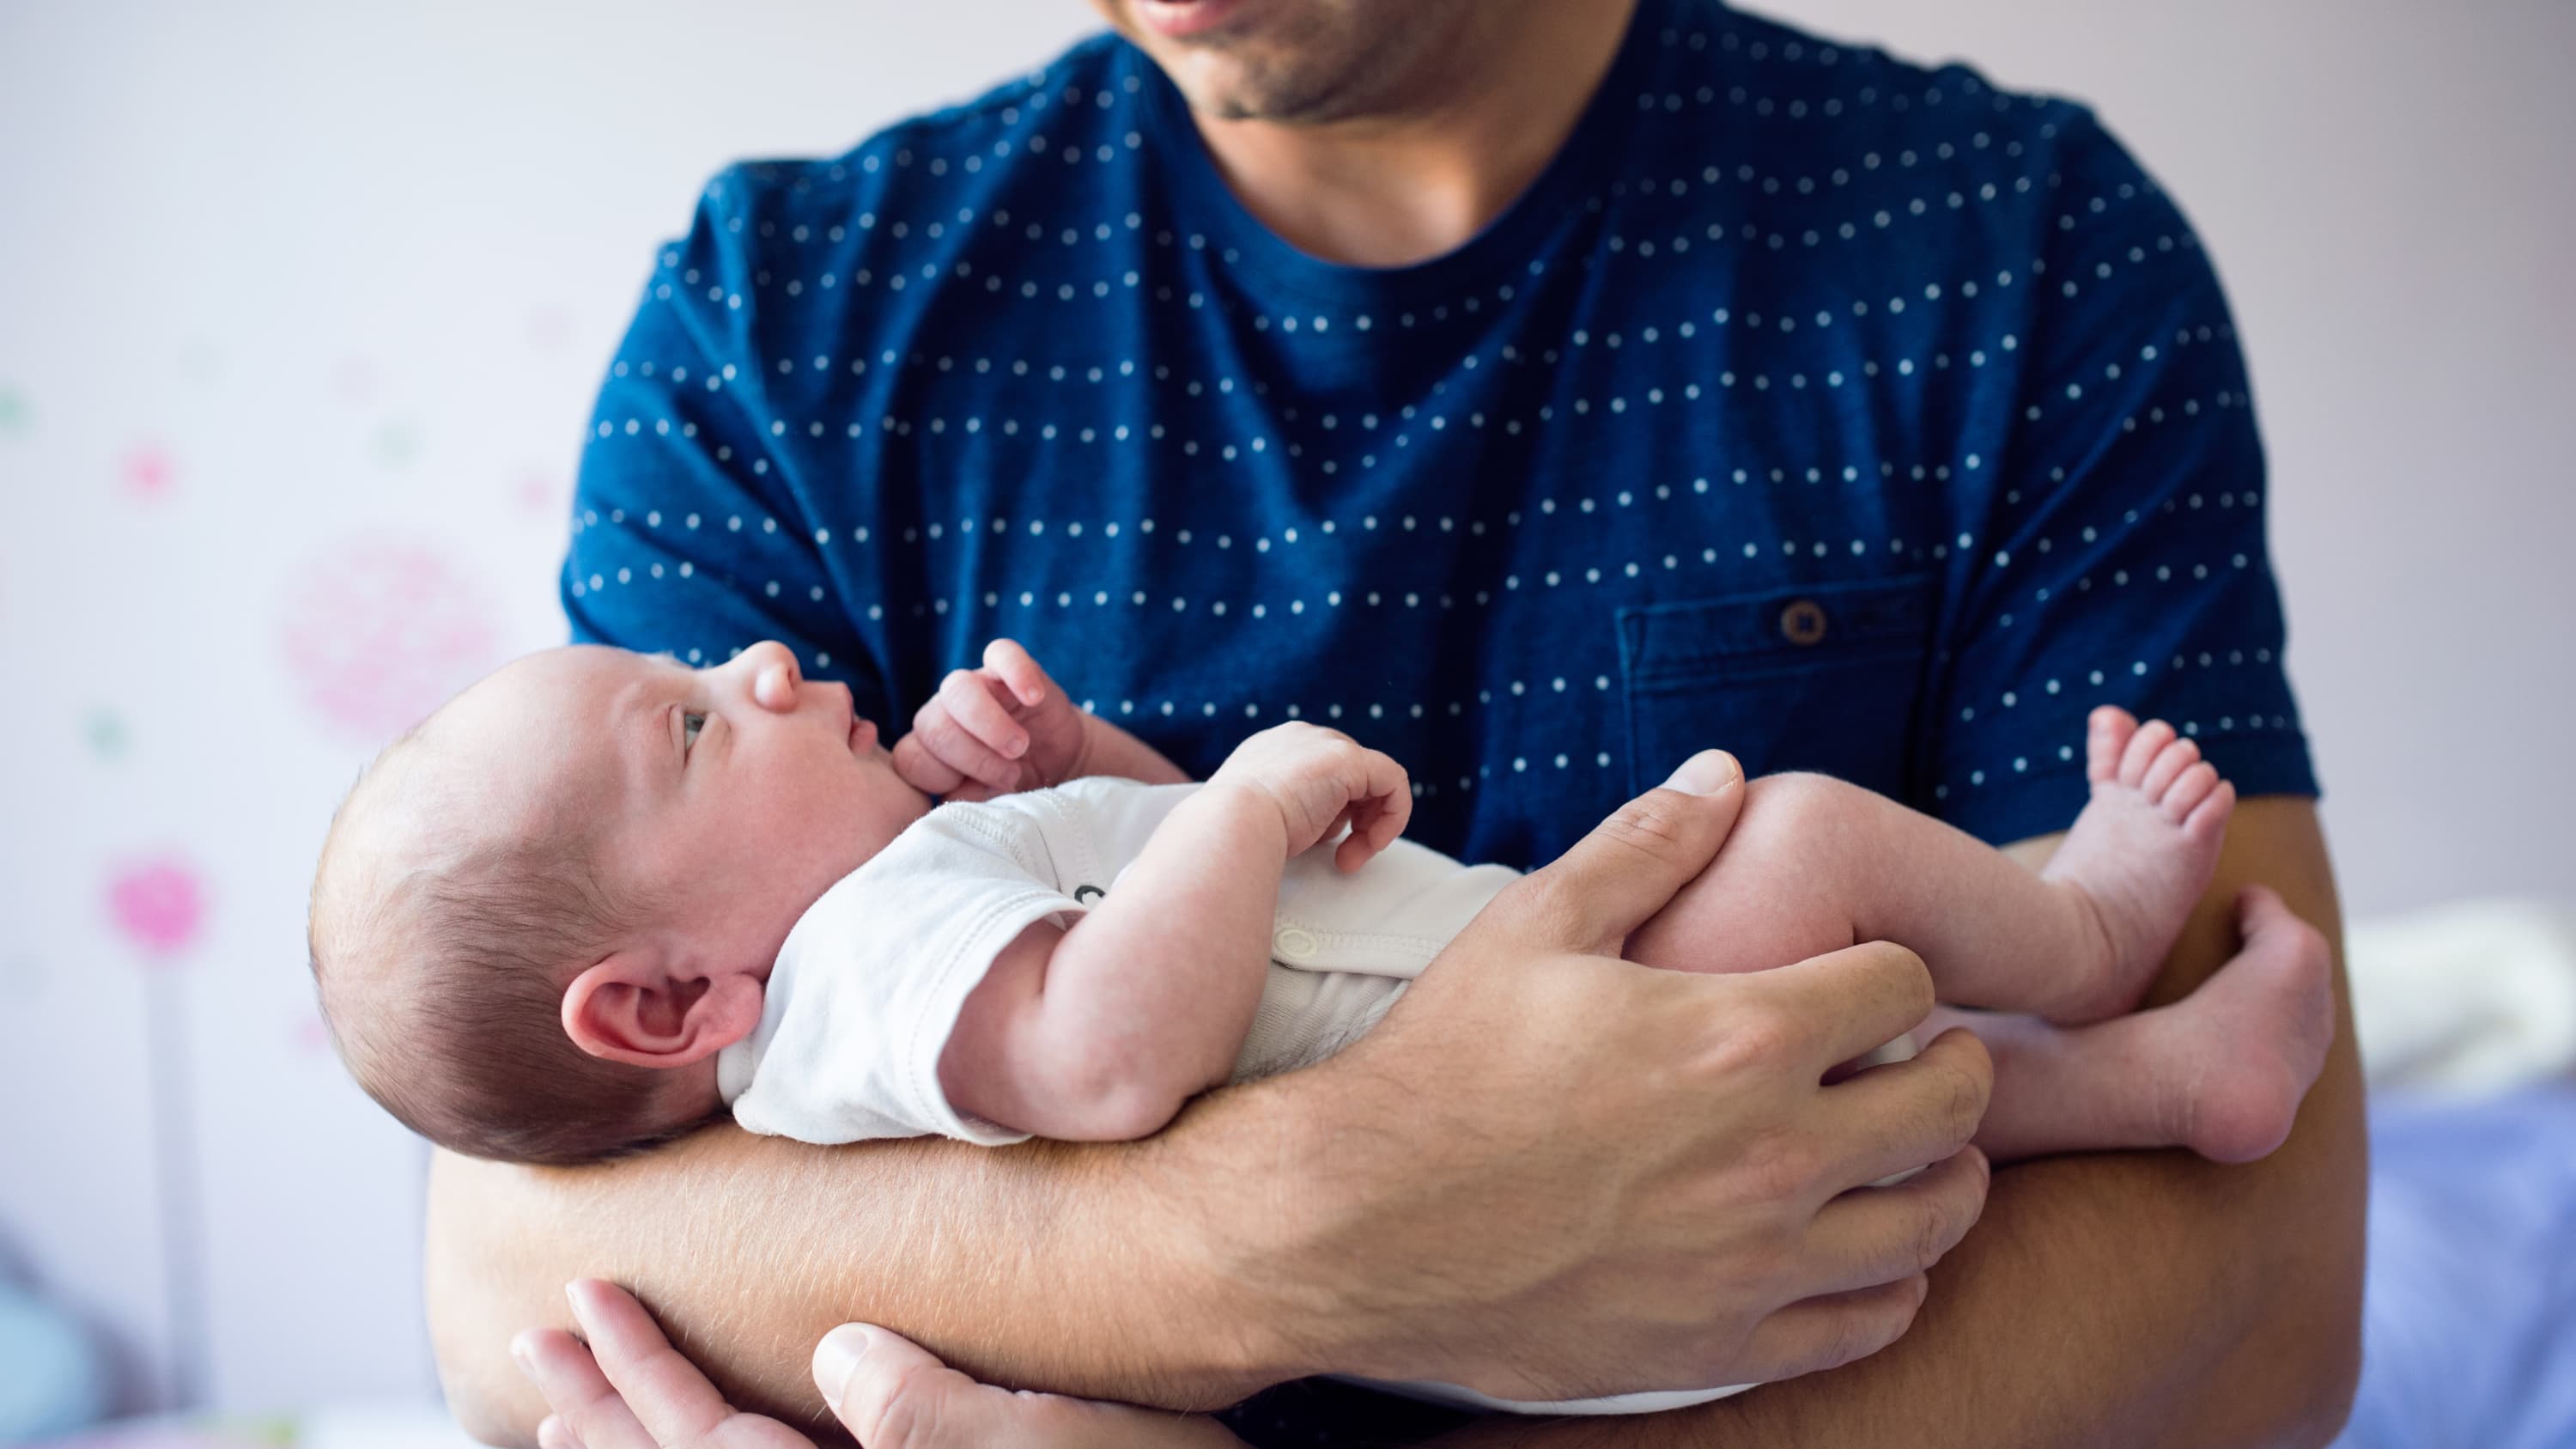 A father cradles a newborn son with a congenital heart defect.